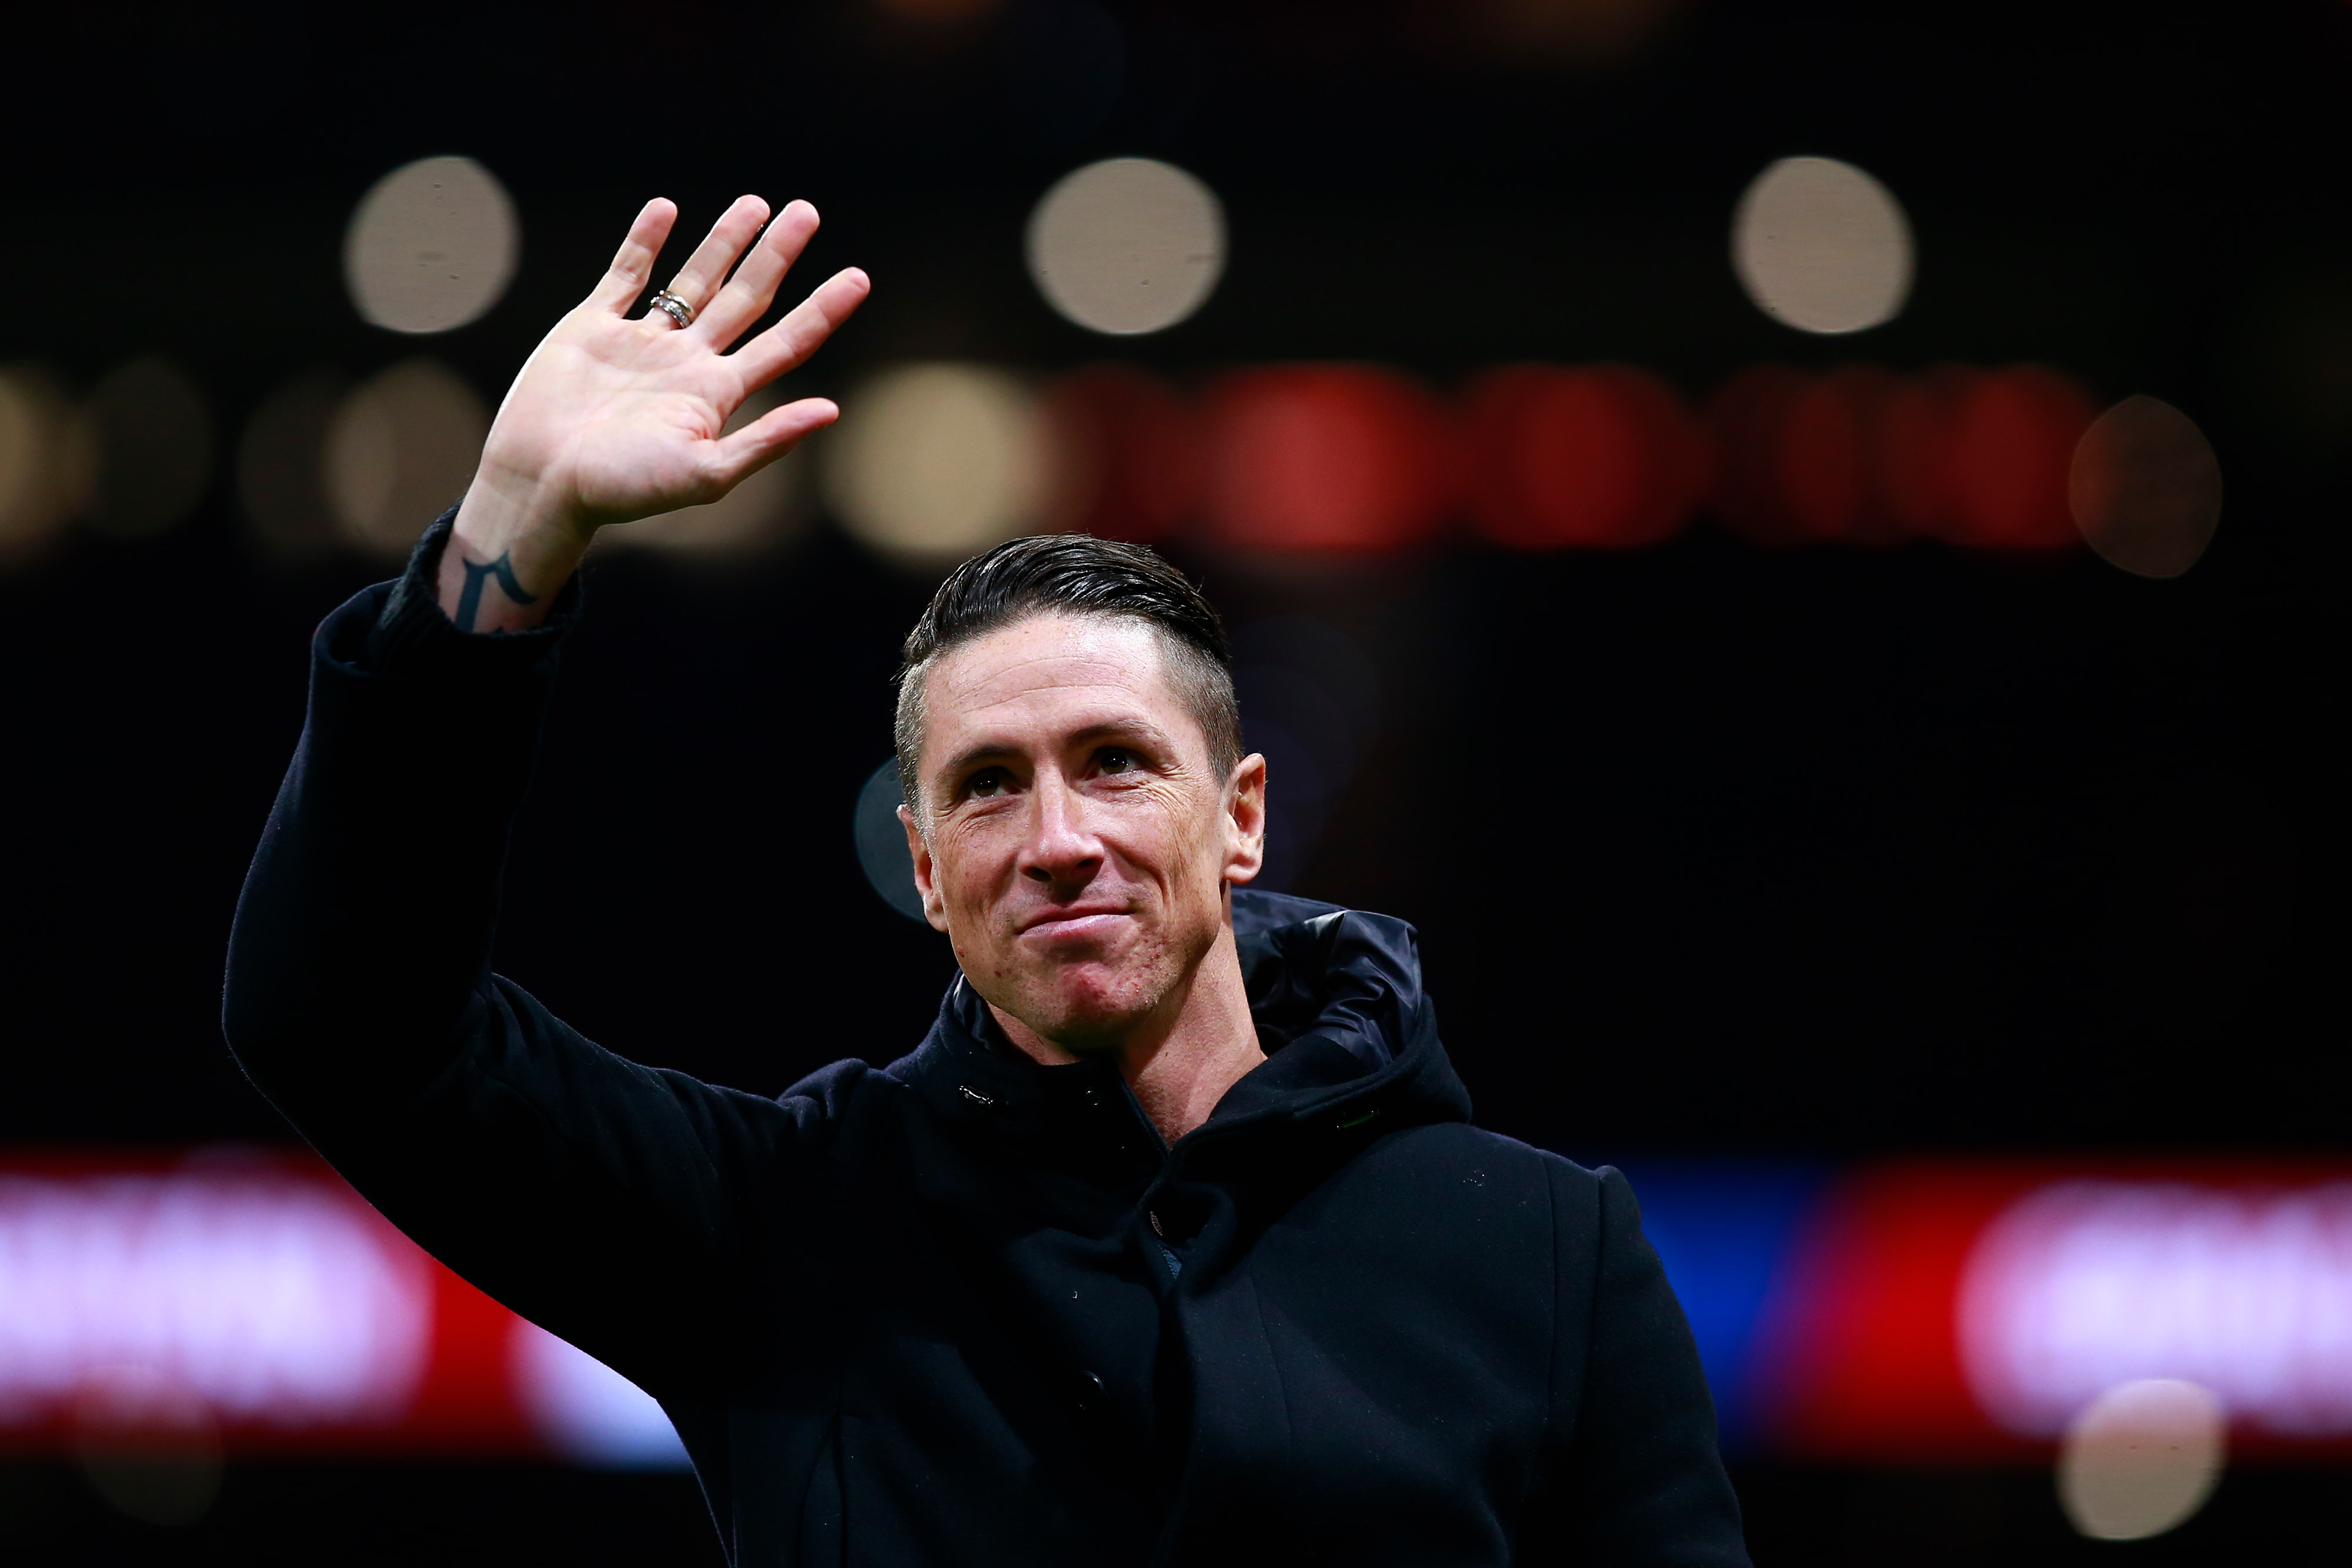 MADRID, SPAIN - DECEMBER 22: Former Atletico de Madrid player Fernando Torres waves the audience as he attends a tribute in honor of his former teammate Gabi Fernandez after  the La Liga match between  Club Atletico de Madrid and RCD Espanyol at Wanda Metropolitano on December 22, 2018 in Madrid, Spain. (Photo by Gonzalo Arroyo Moreno/Getty Images)